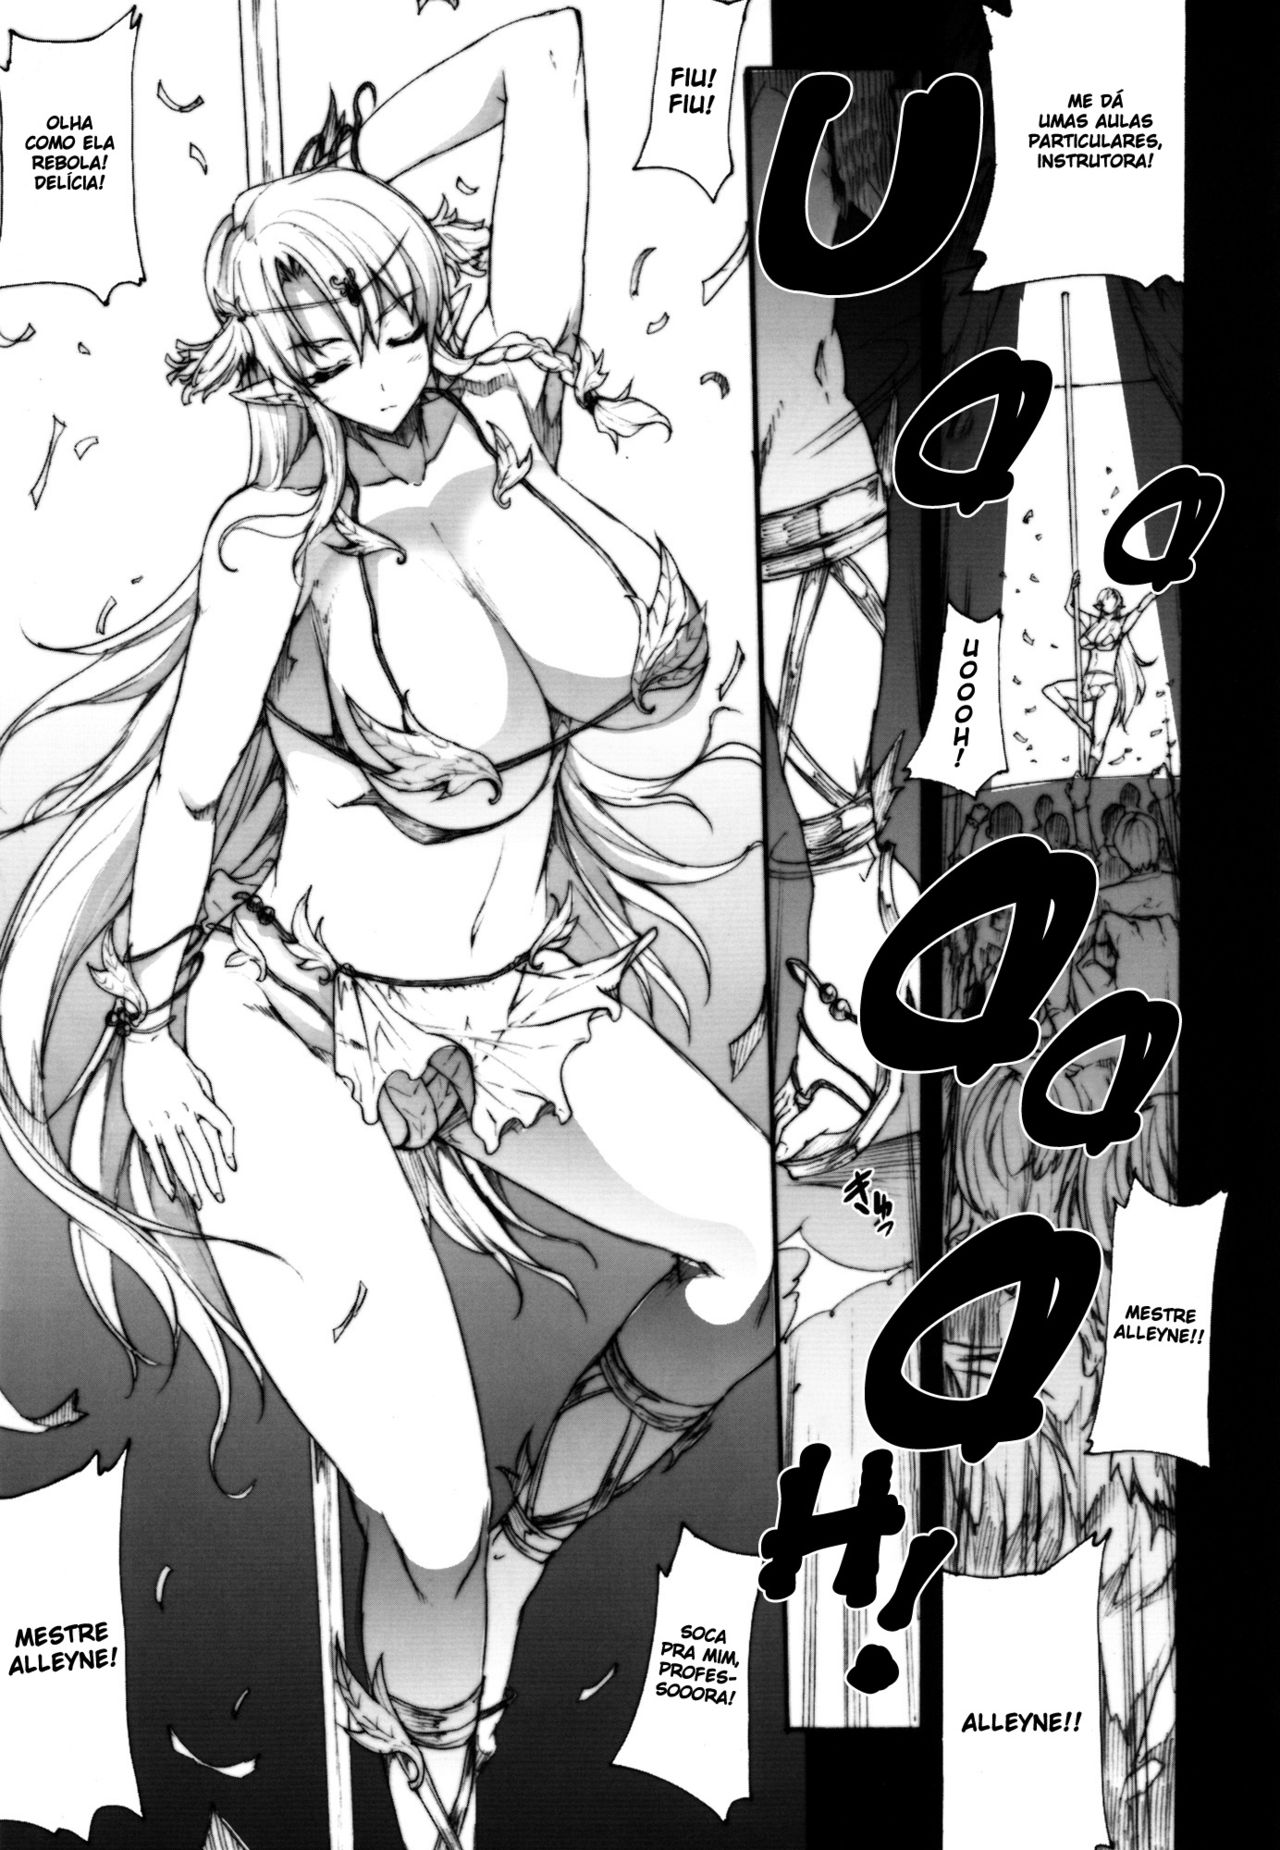 (C82) [Erect Touch (Erect Sawaru)] QUEEN’S SLAVE 3 (Queen’s Blade) [Portuguese] (C82) [Erect Touch (エレクトさわる)] QUEEN’S SLAVE 3 (クイーンズブレイド) [ポルトガル翻訳]